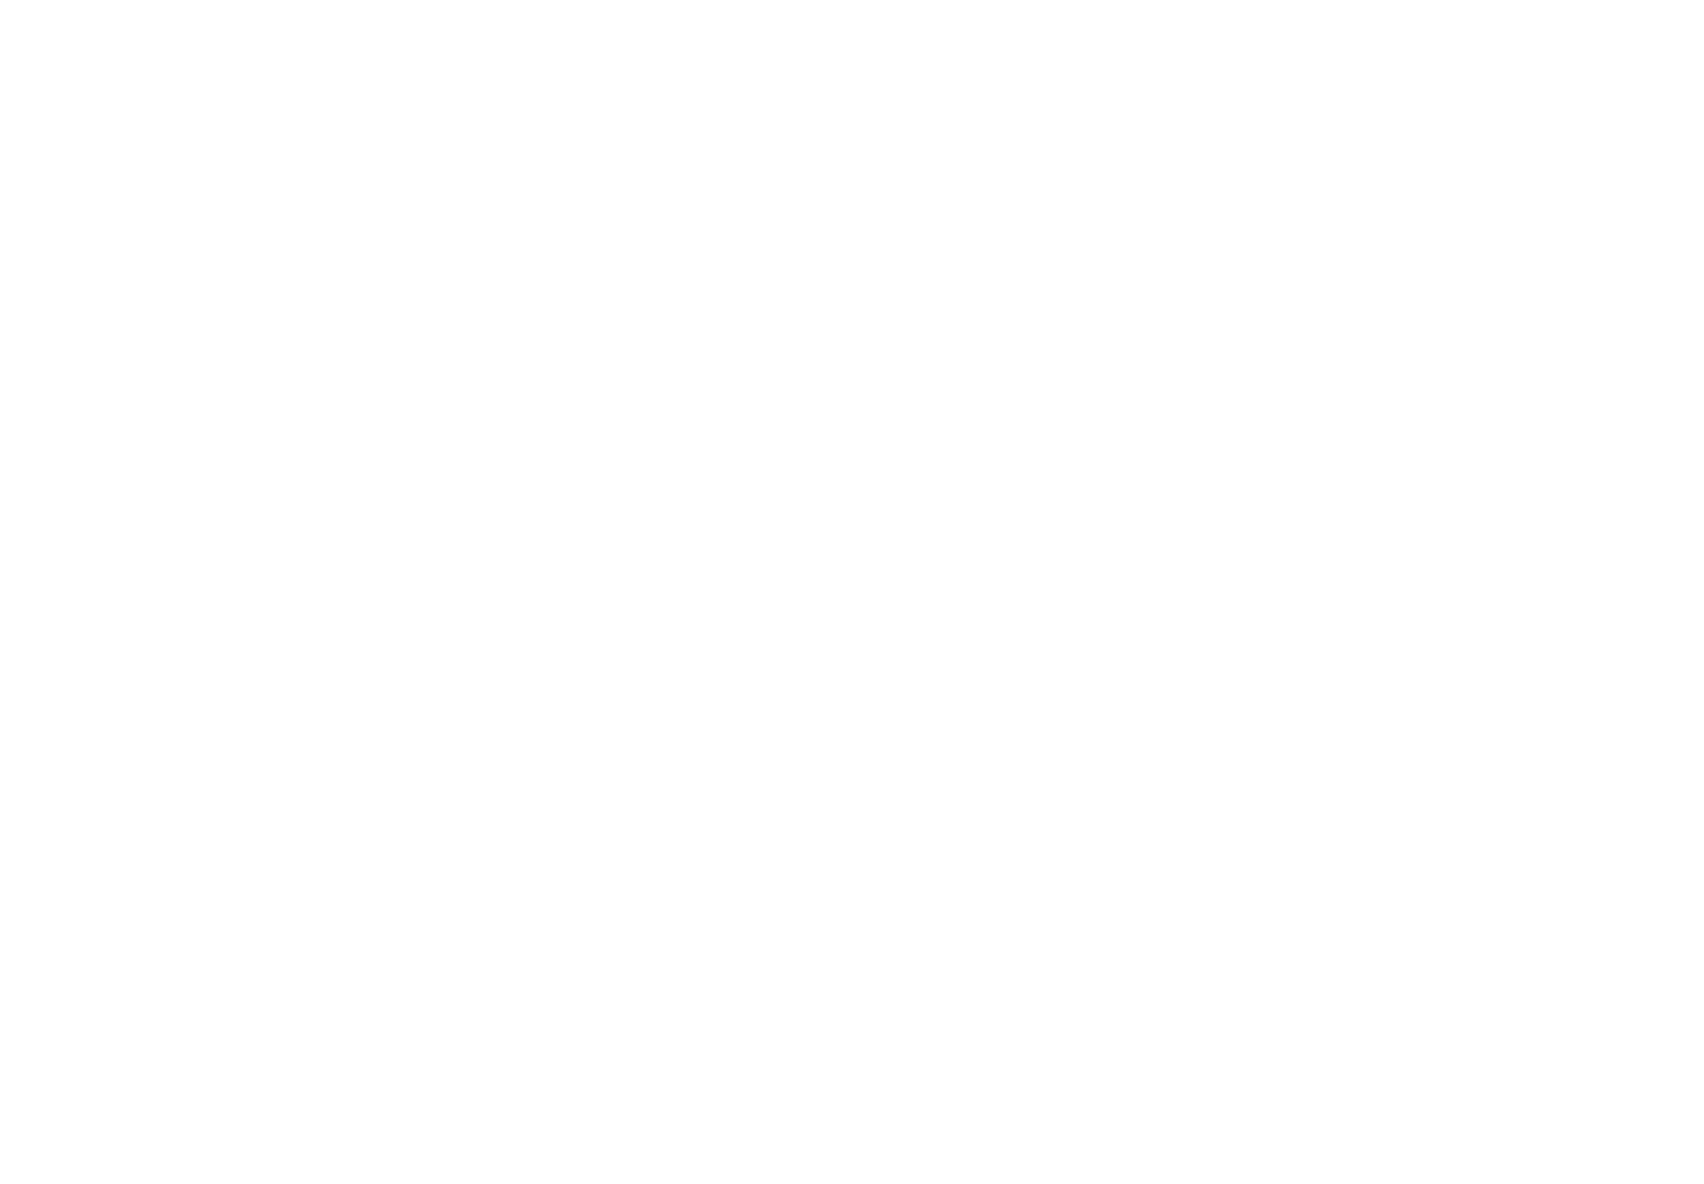 Smith & Wesson logo large for dark backgrounds (transparent PNG)